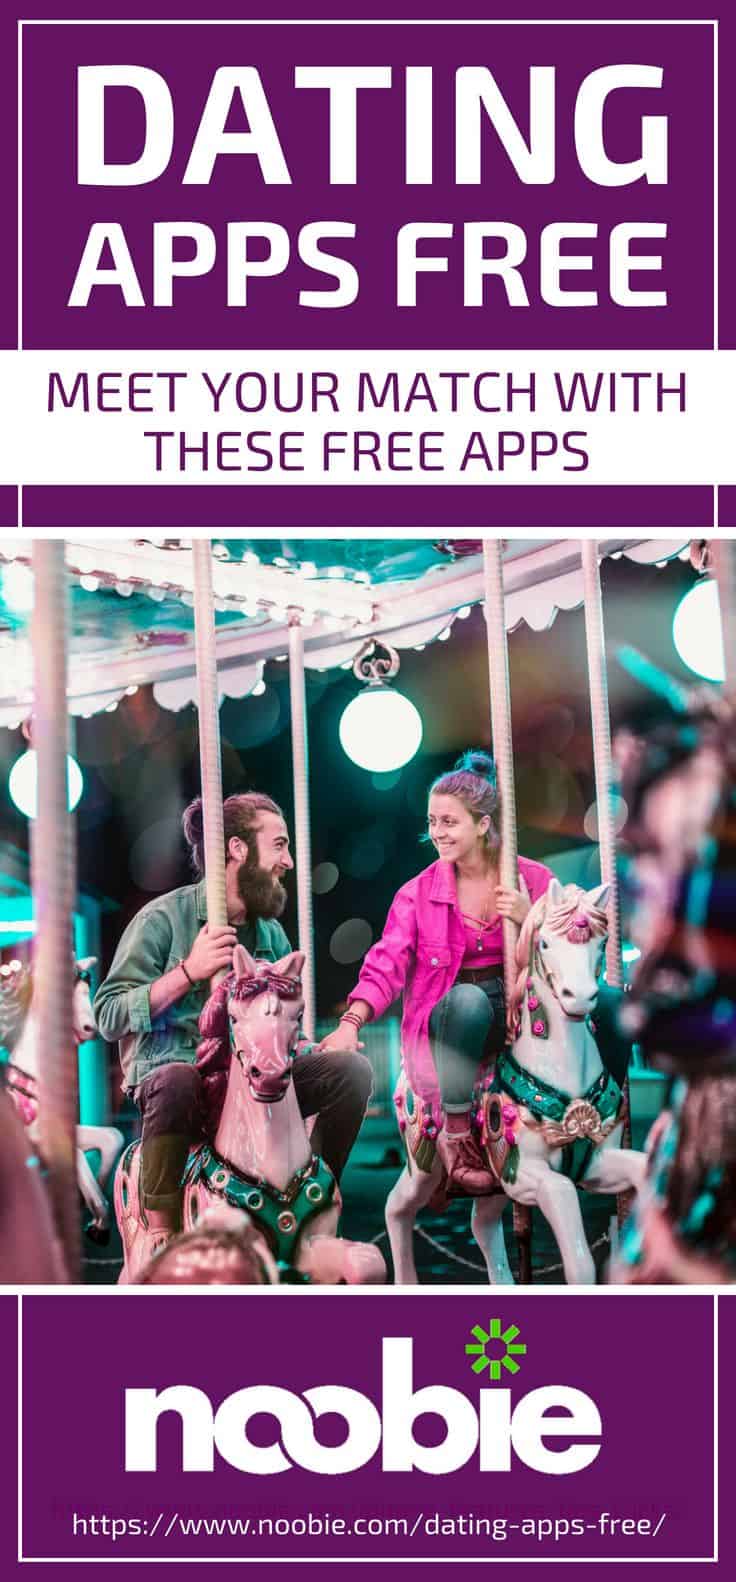 Dating Apps Free Meet Your Match With These Free Apps